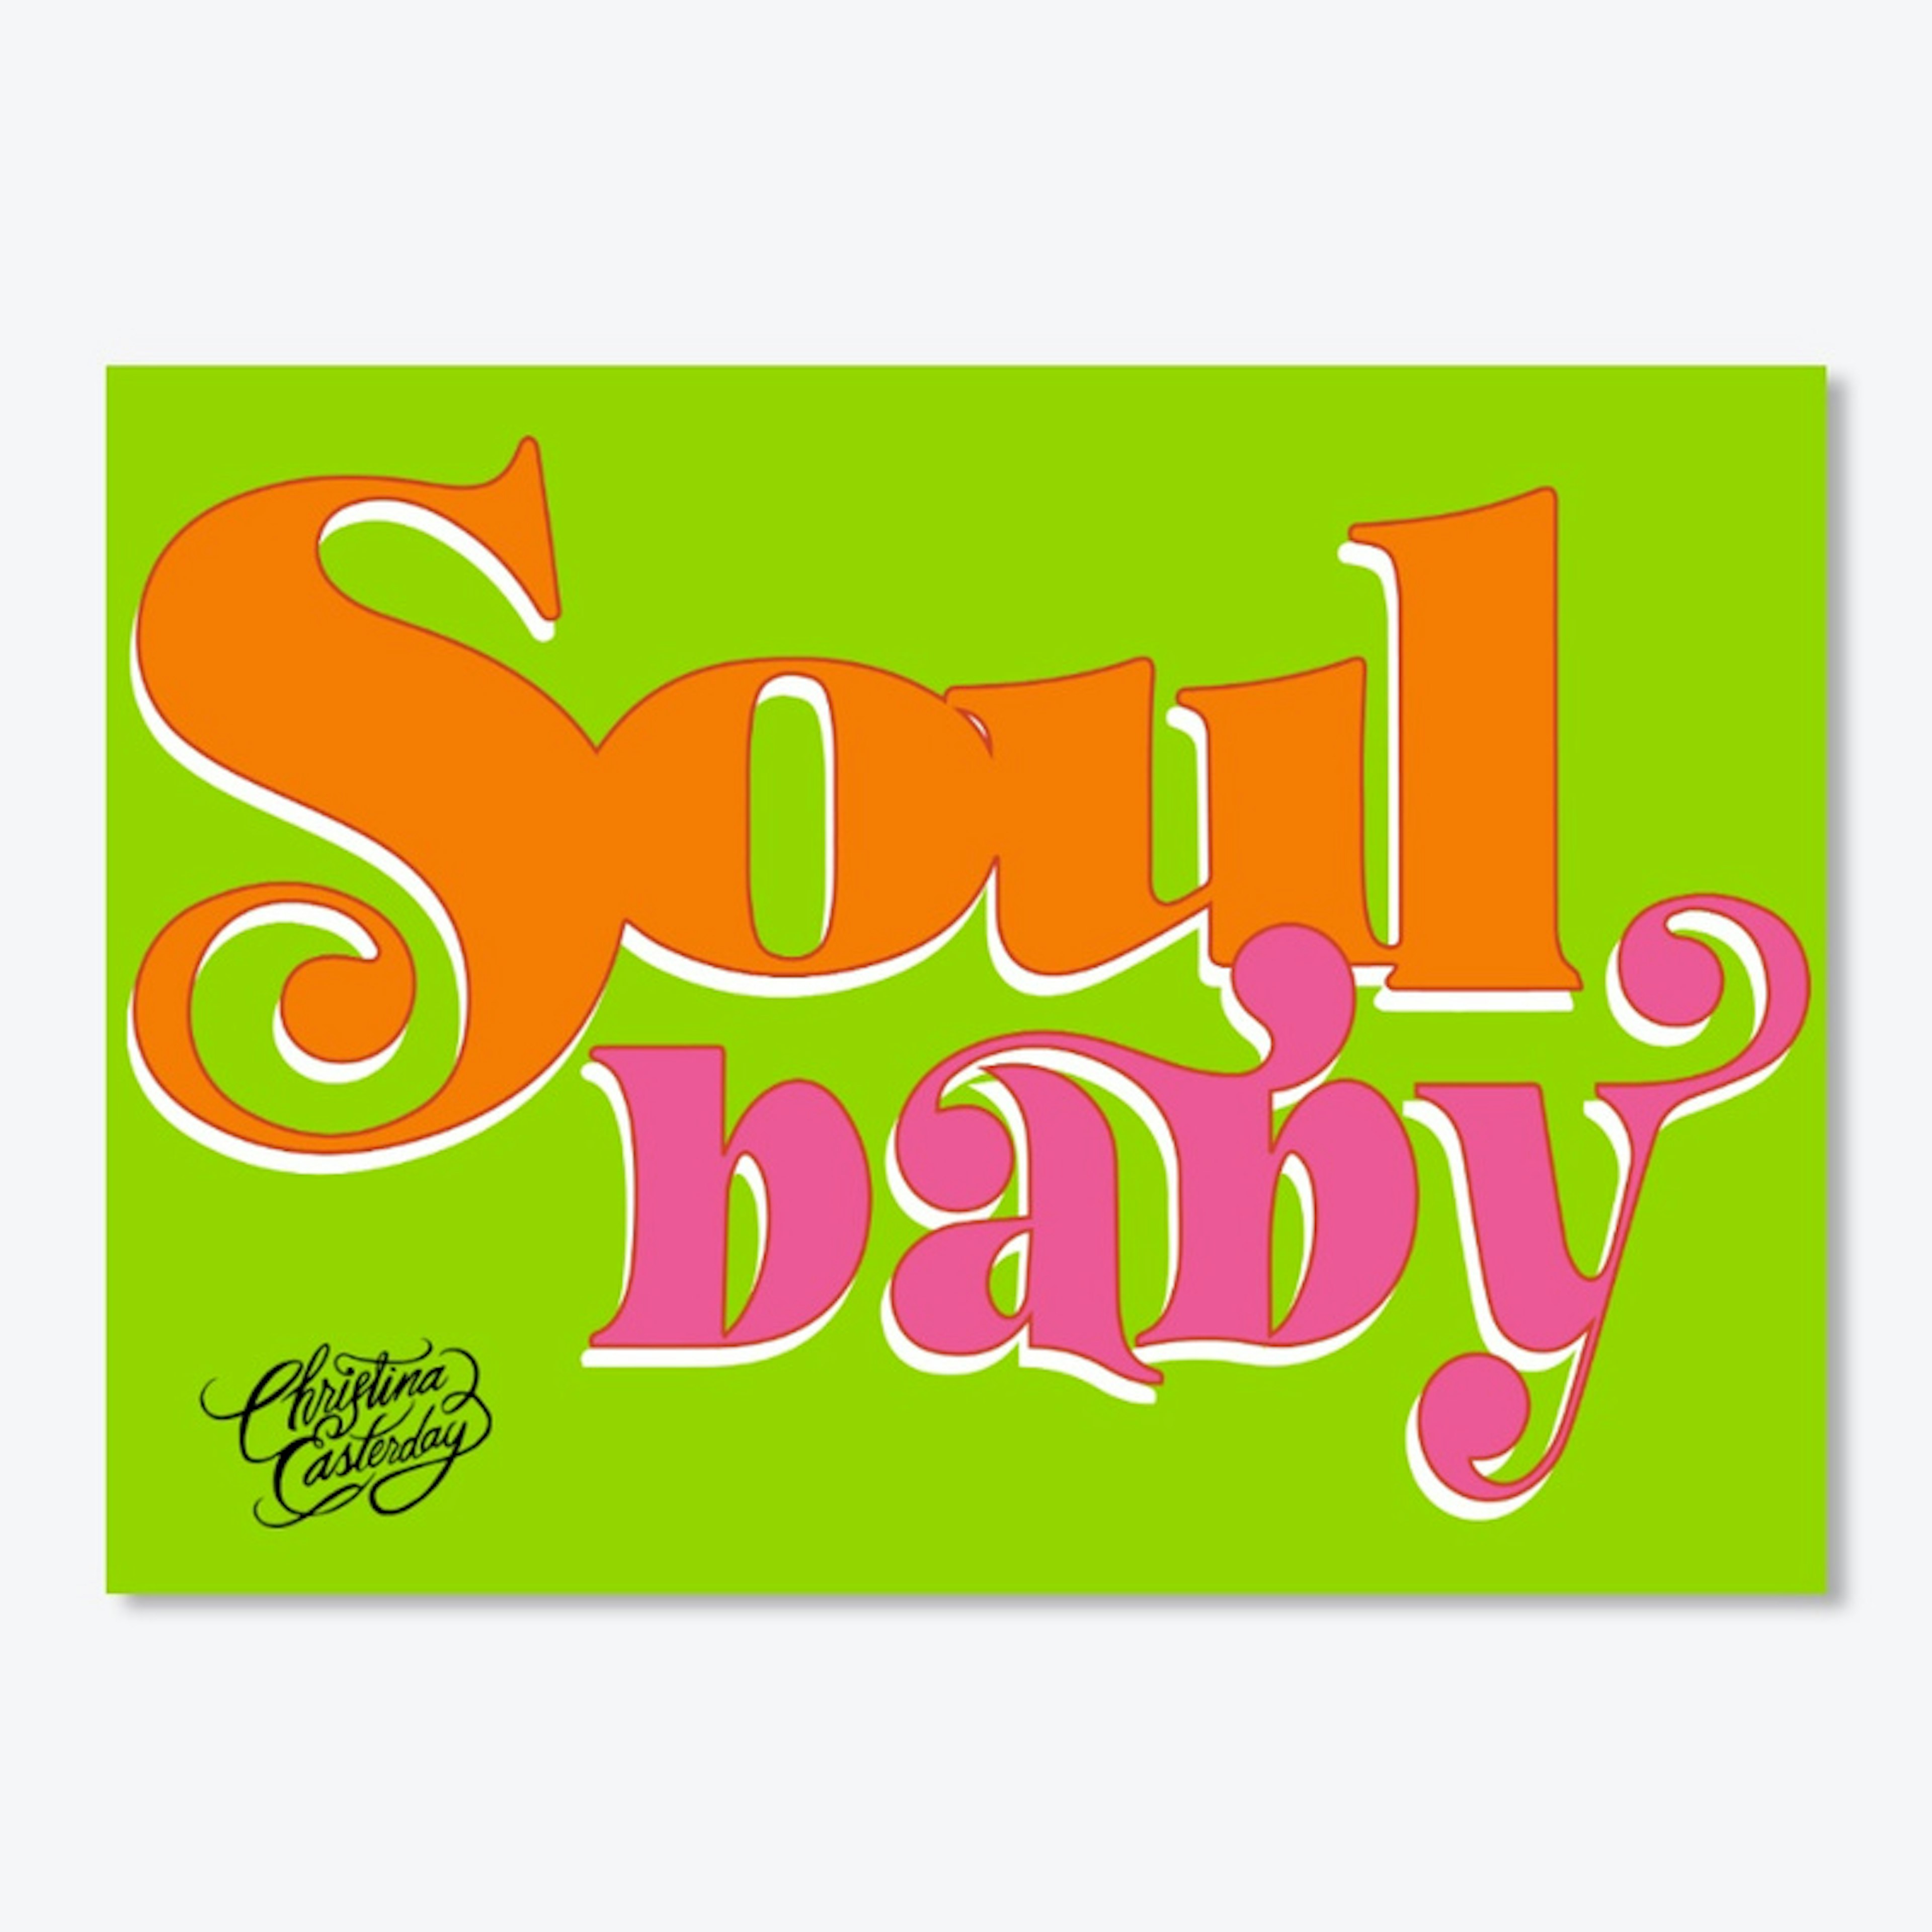 SPECIAL EDITION Soul Baby Sticker